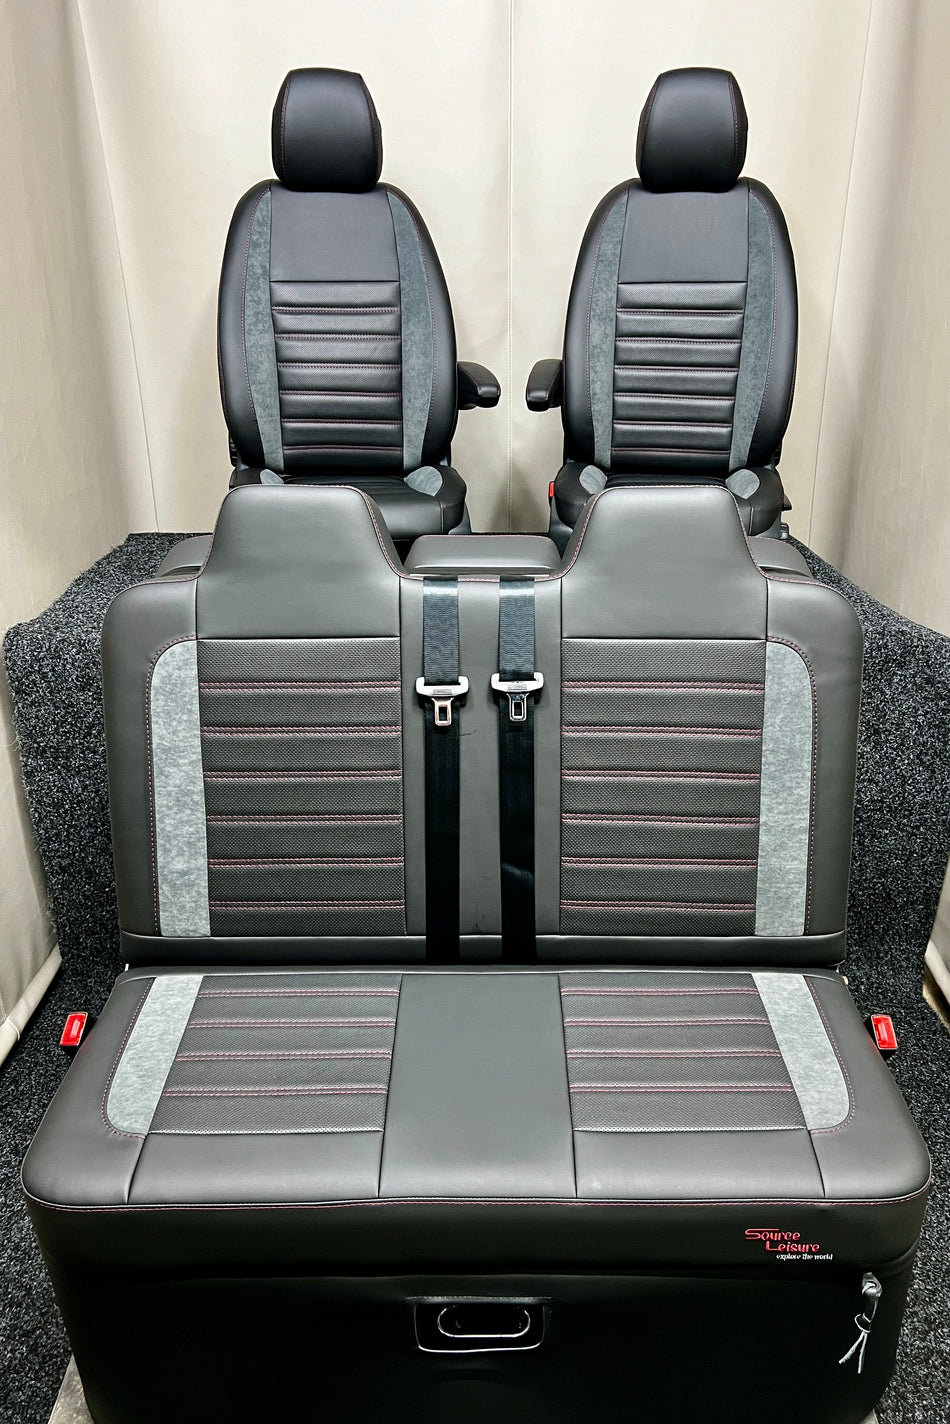 Mercedes - Vito Seats & 3/4 M1 Tested Rock & Roll Bed